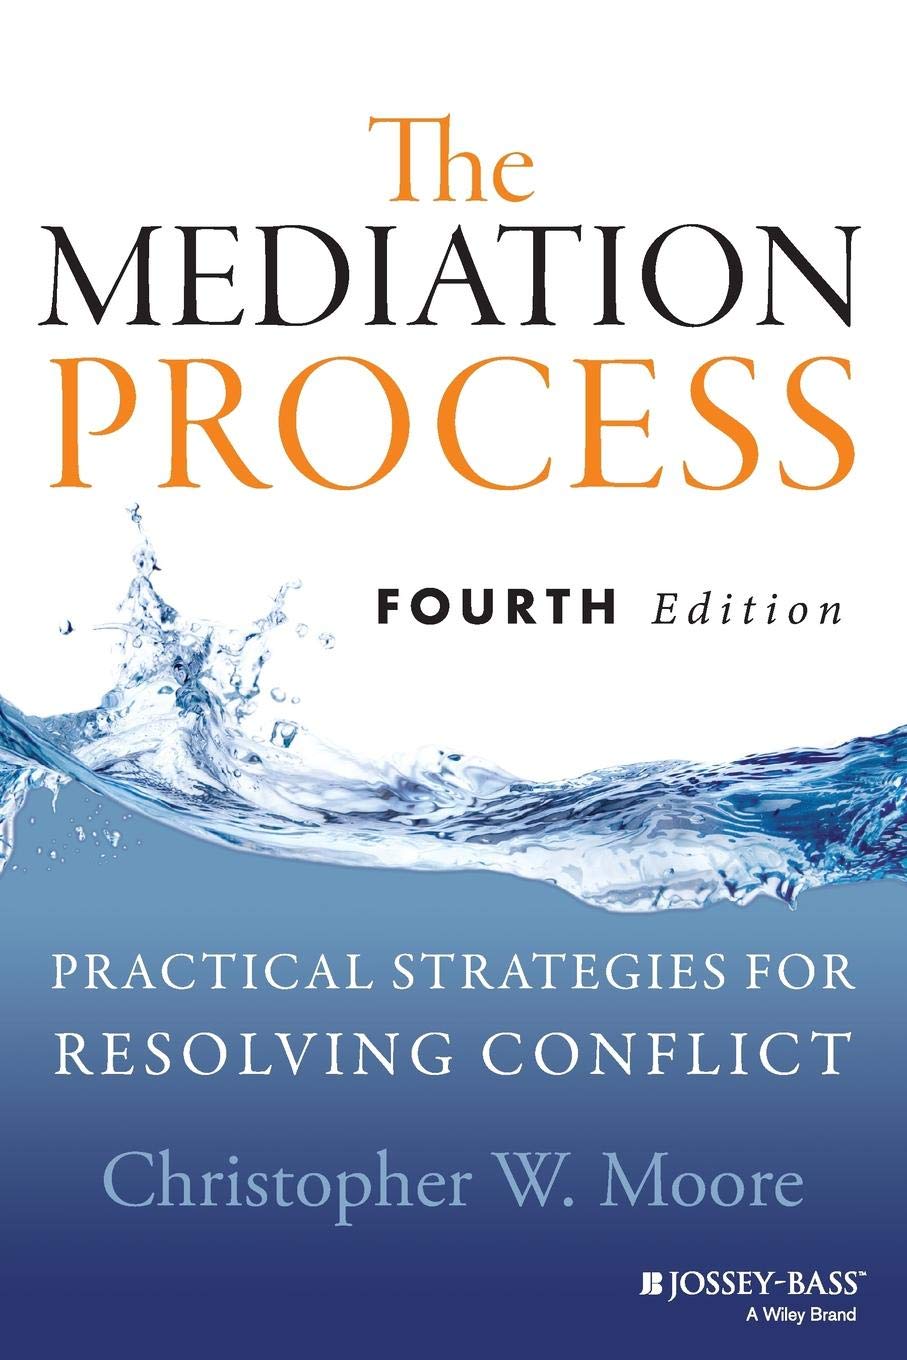 mediation process practical strategies for resolving conflict, The Mediation Process: Practical Strategies for Resolving Conflict